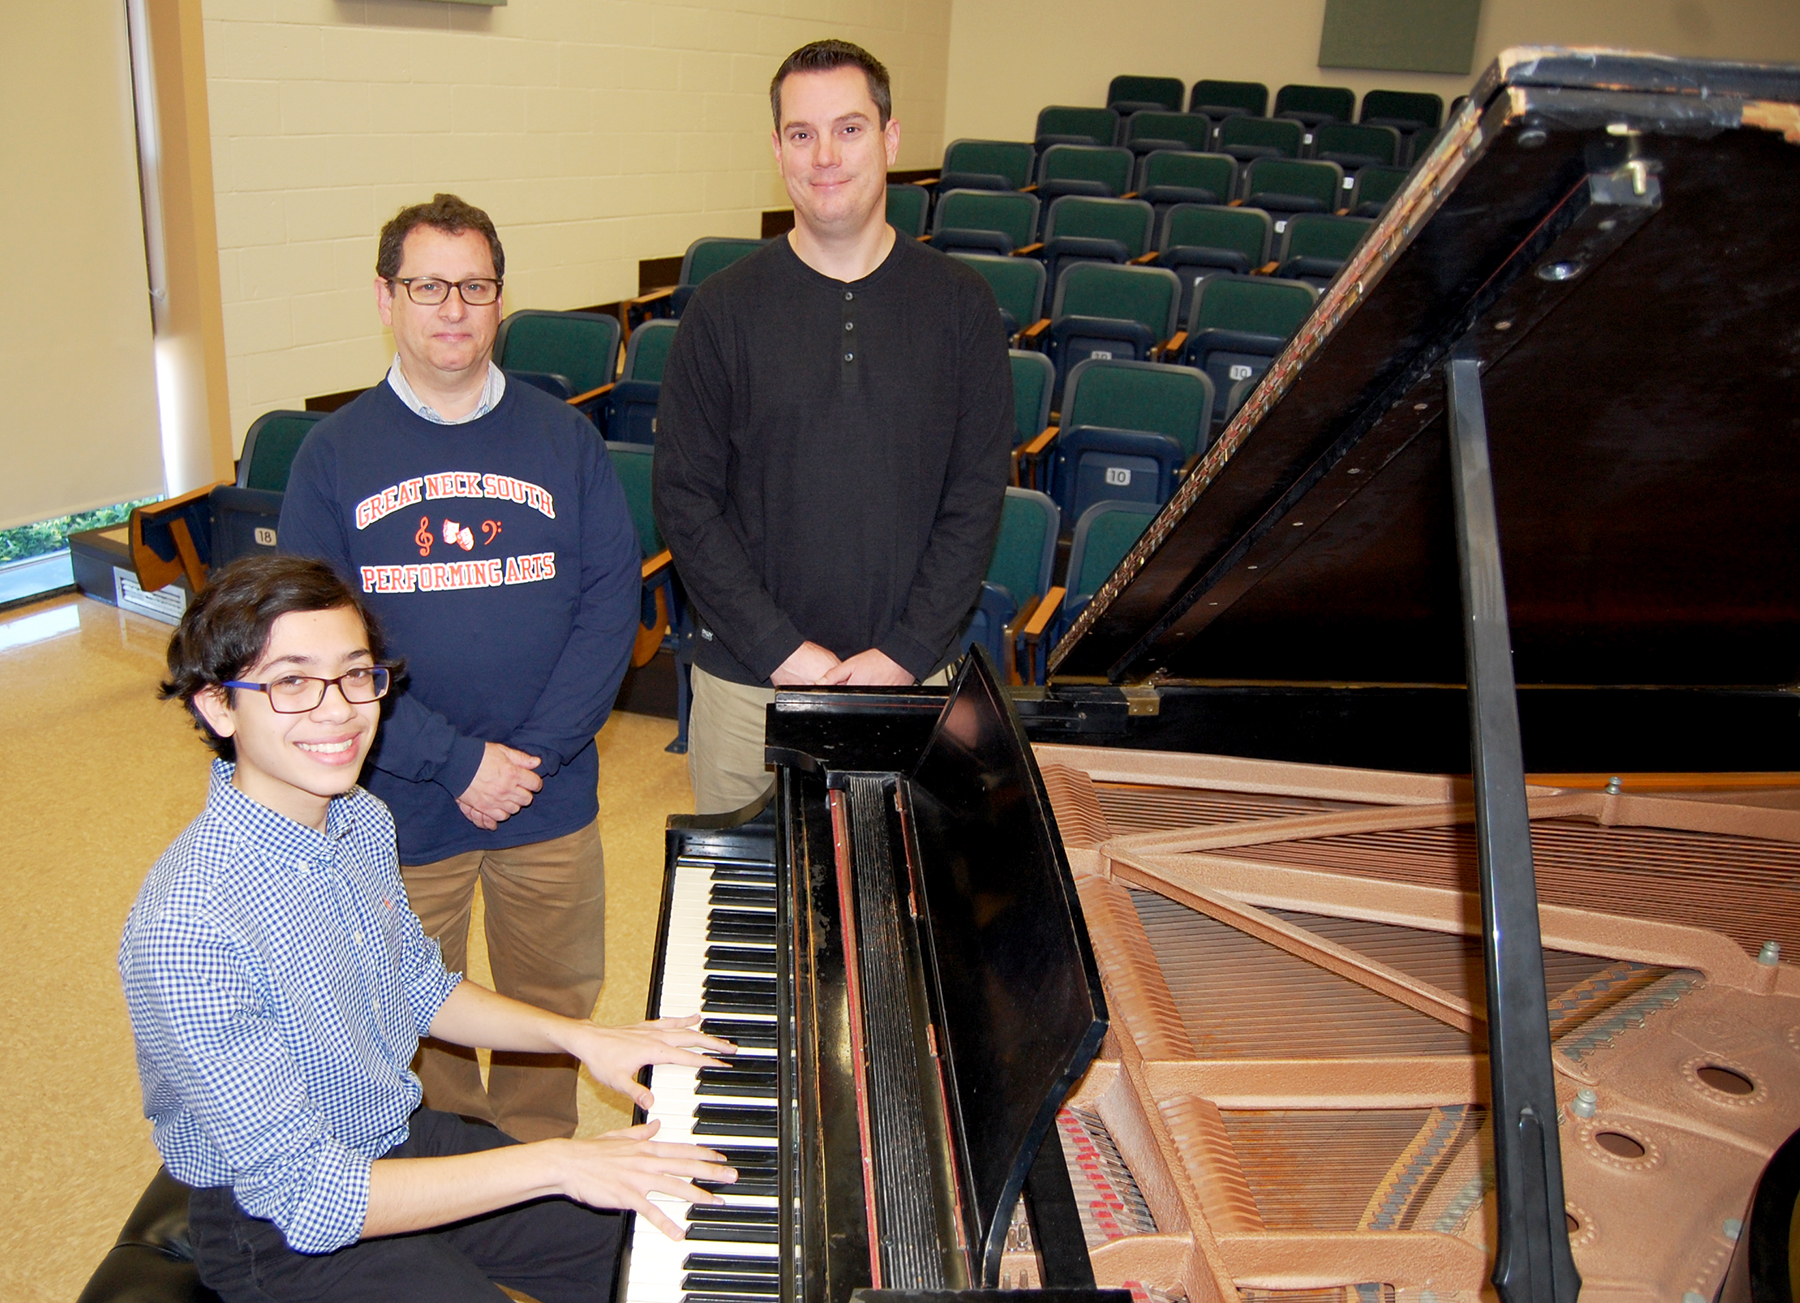 Benjamin T. Rossen is congratulated by Mr. Michael Schwartz, performing arts department head, and Mr. Mark Boschen, instrumental music teacher at South High. (Photo courtesy of Great Neck Public Schools)